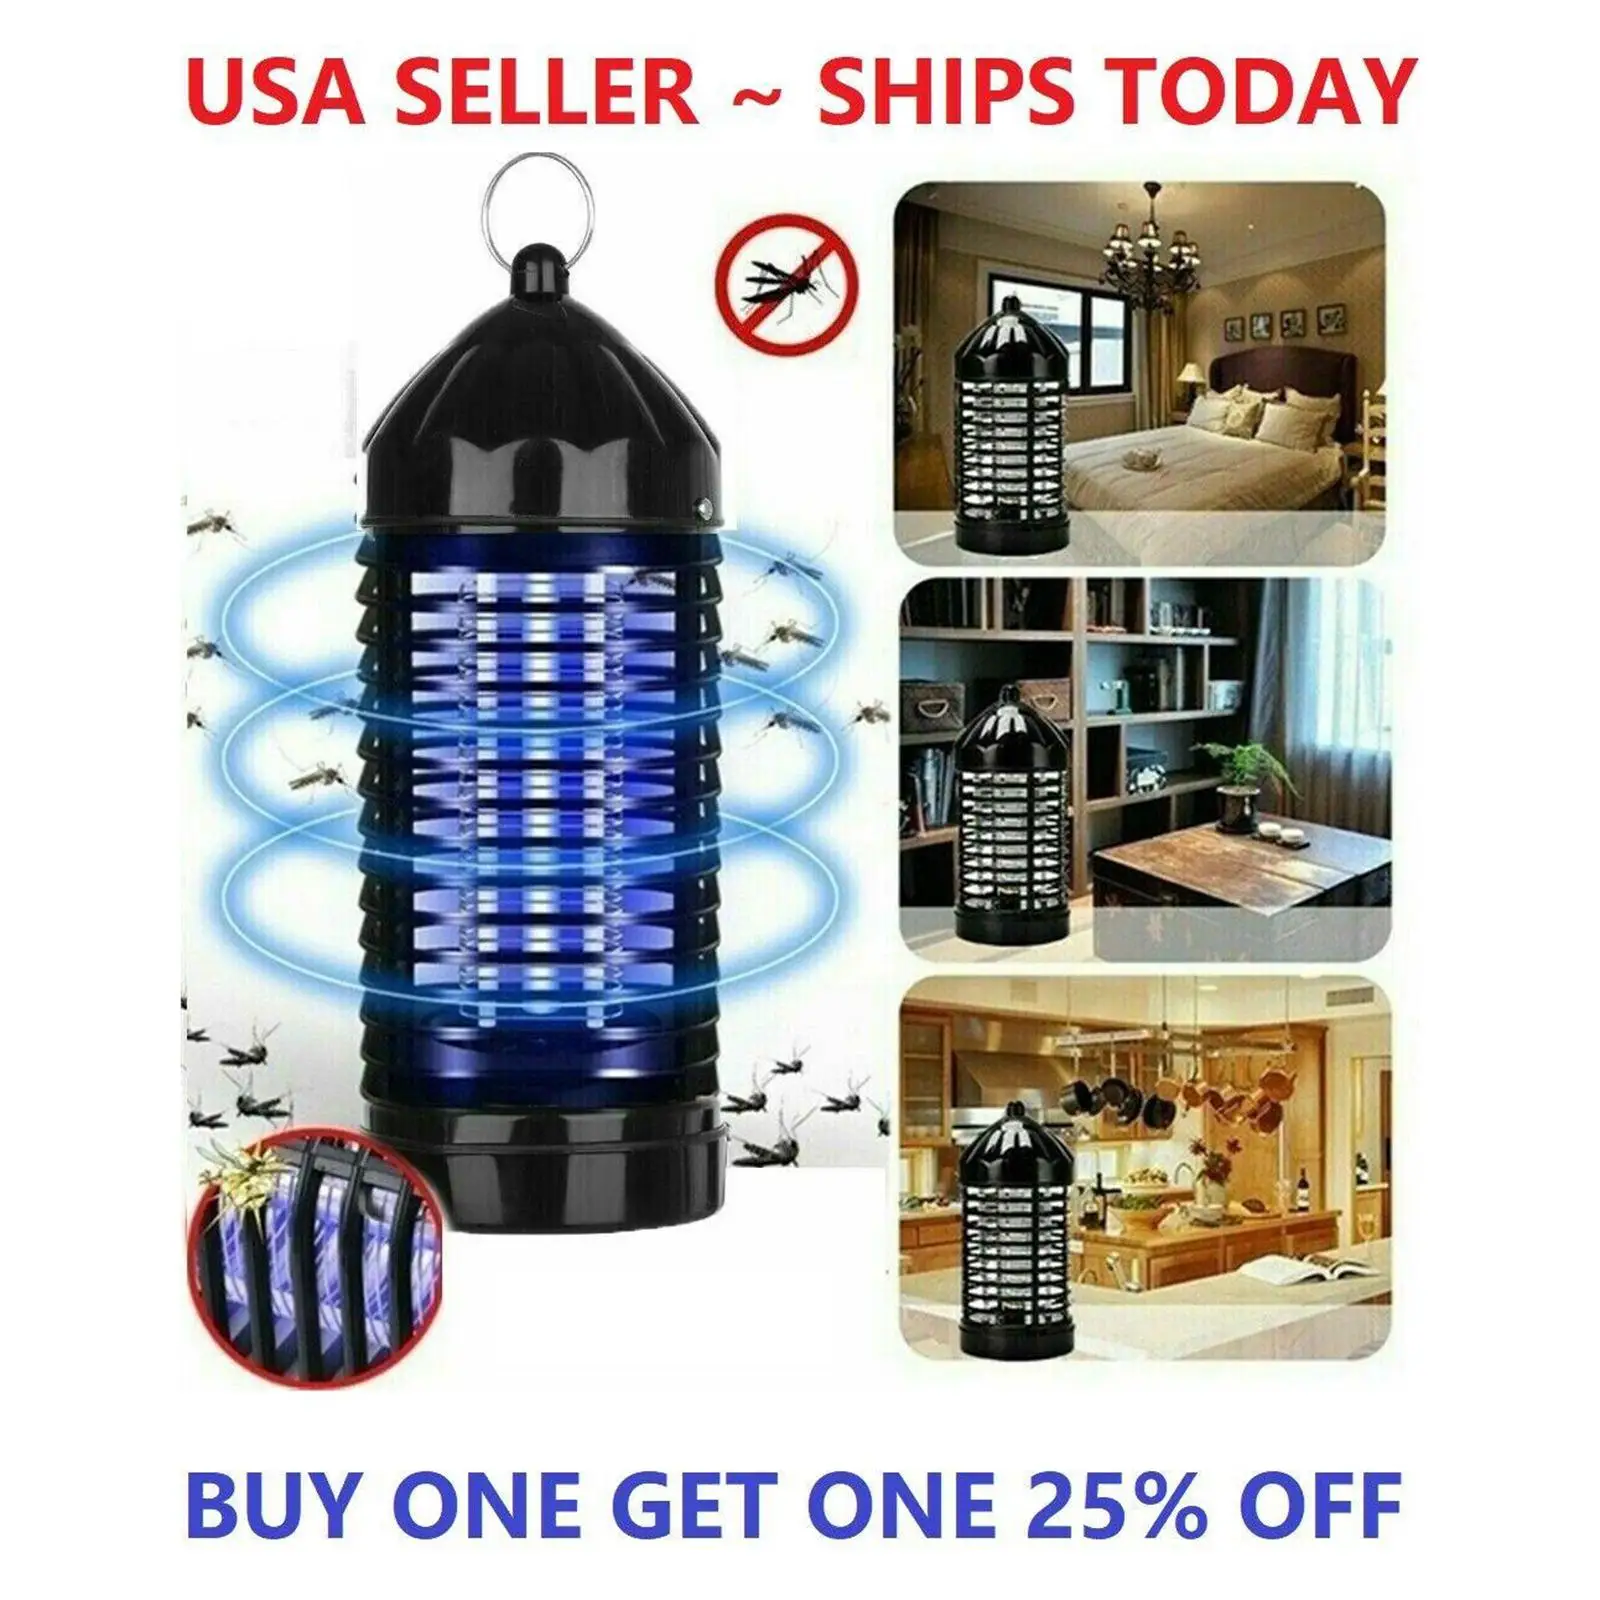 Portable Electric Mosquito Killer Lamp LED Zapper Trap for Home Bedroom Living Room Backyard Stock Farm